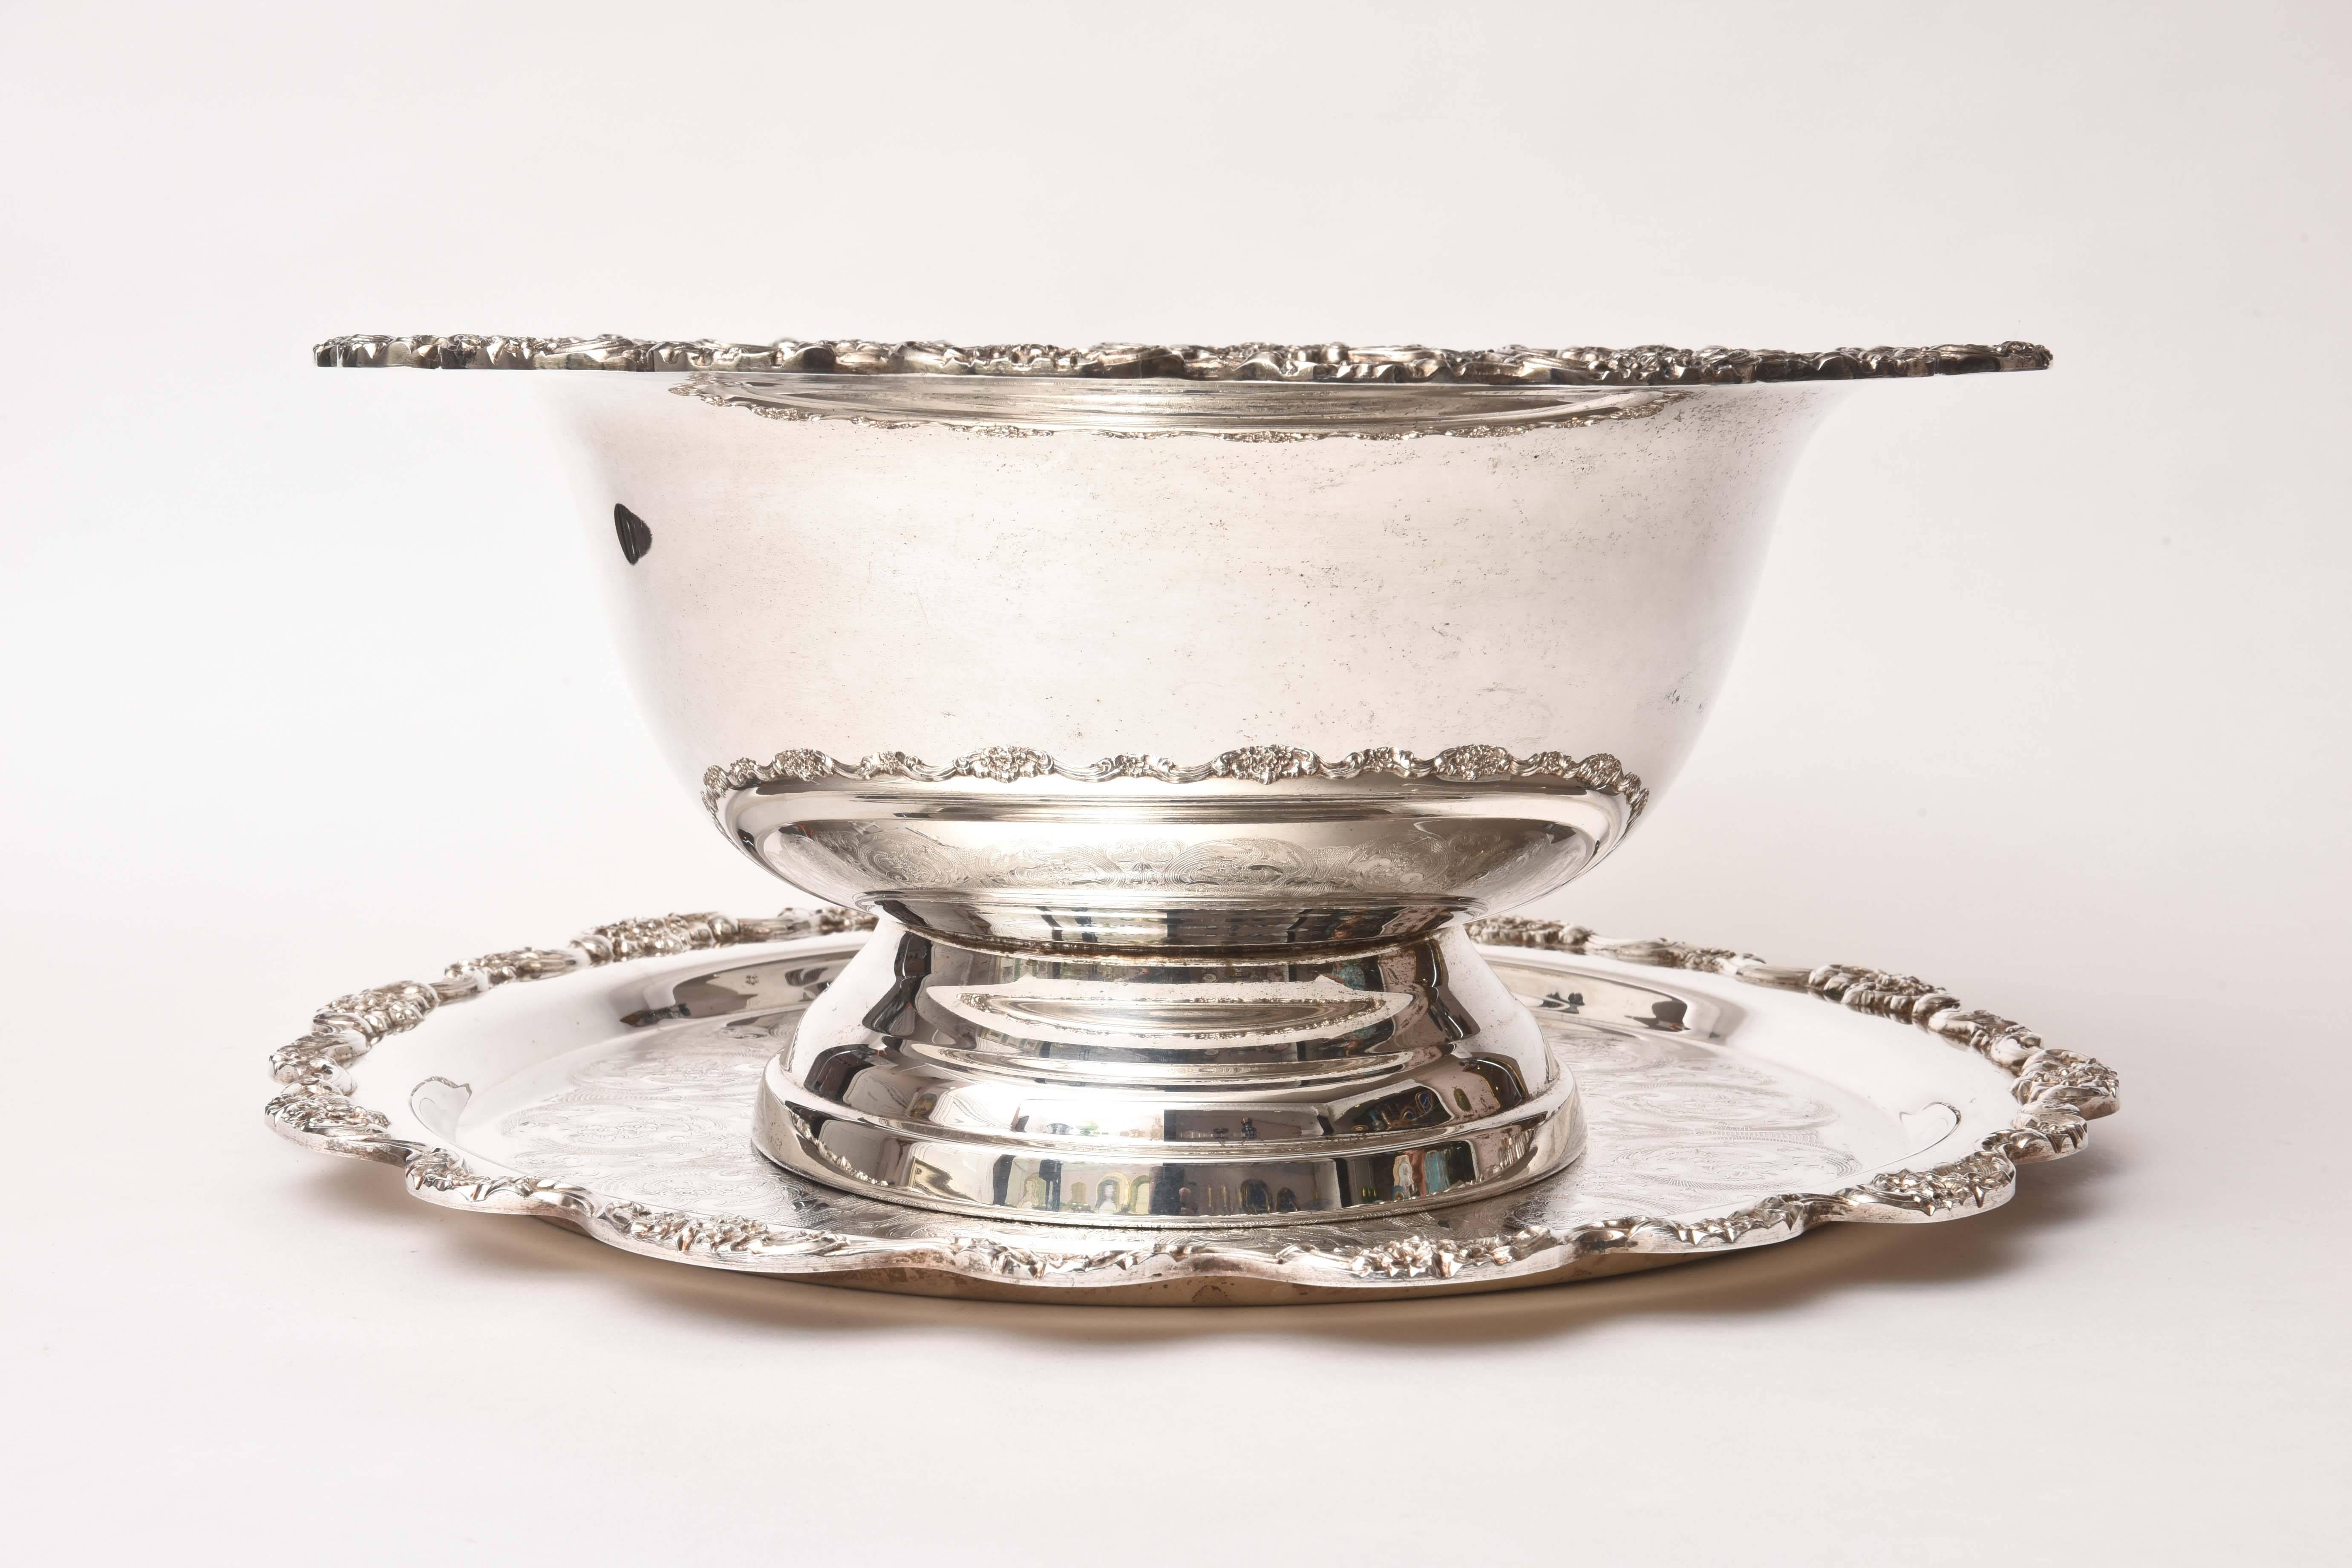 A fantastic punch bowl or centerpiece produced by the American silversmith company: Towle. In really nice vintage condition with no damage or silver loss. A pretty scalloped shape on the border and nicely etched design. It is large in size and would